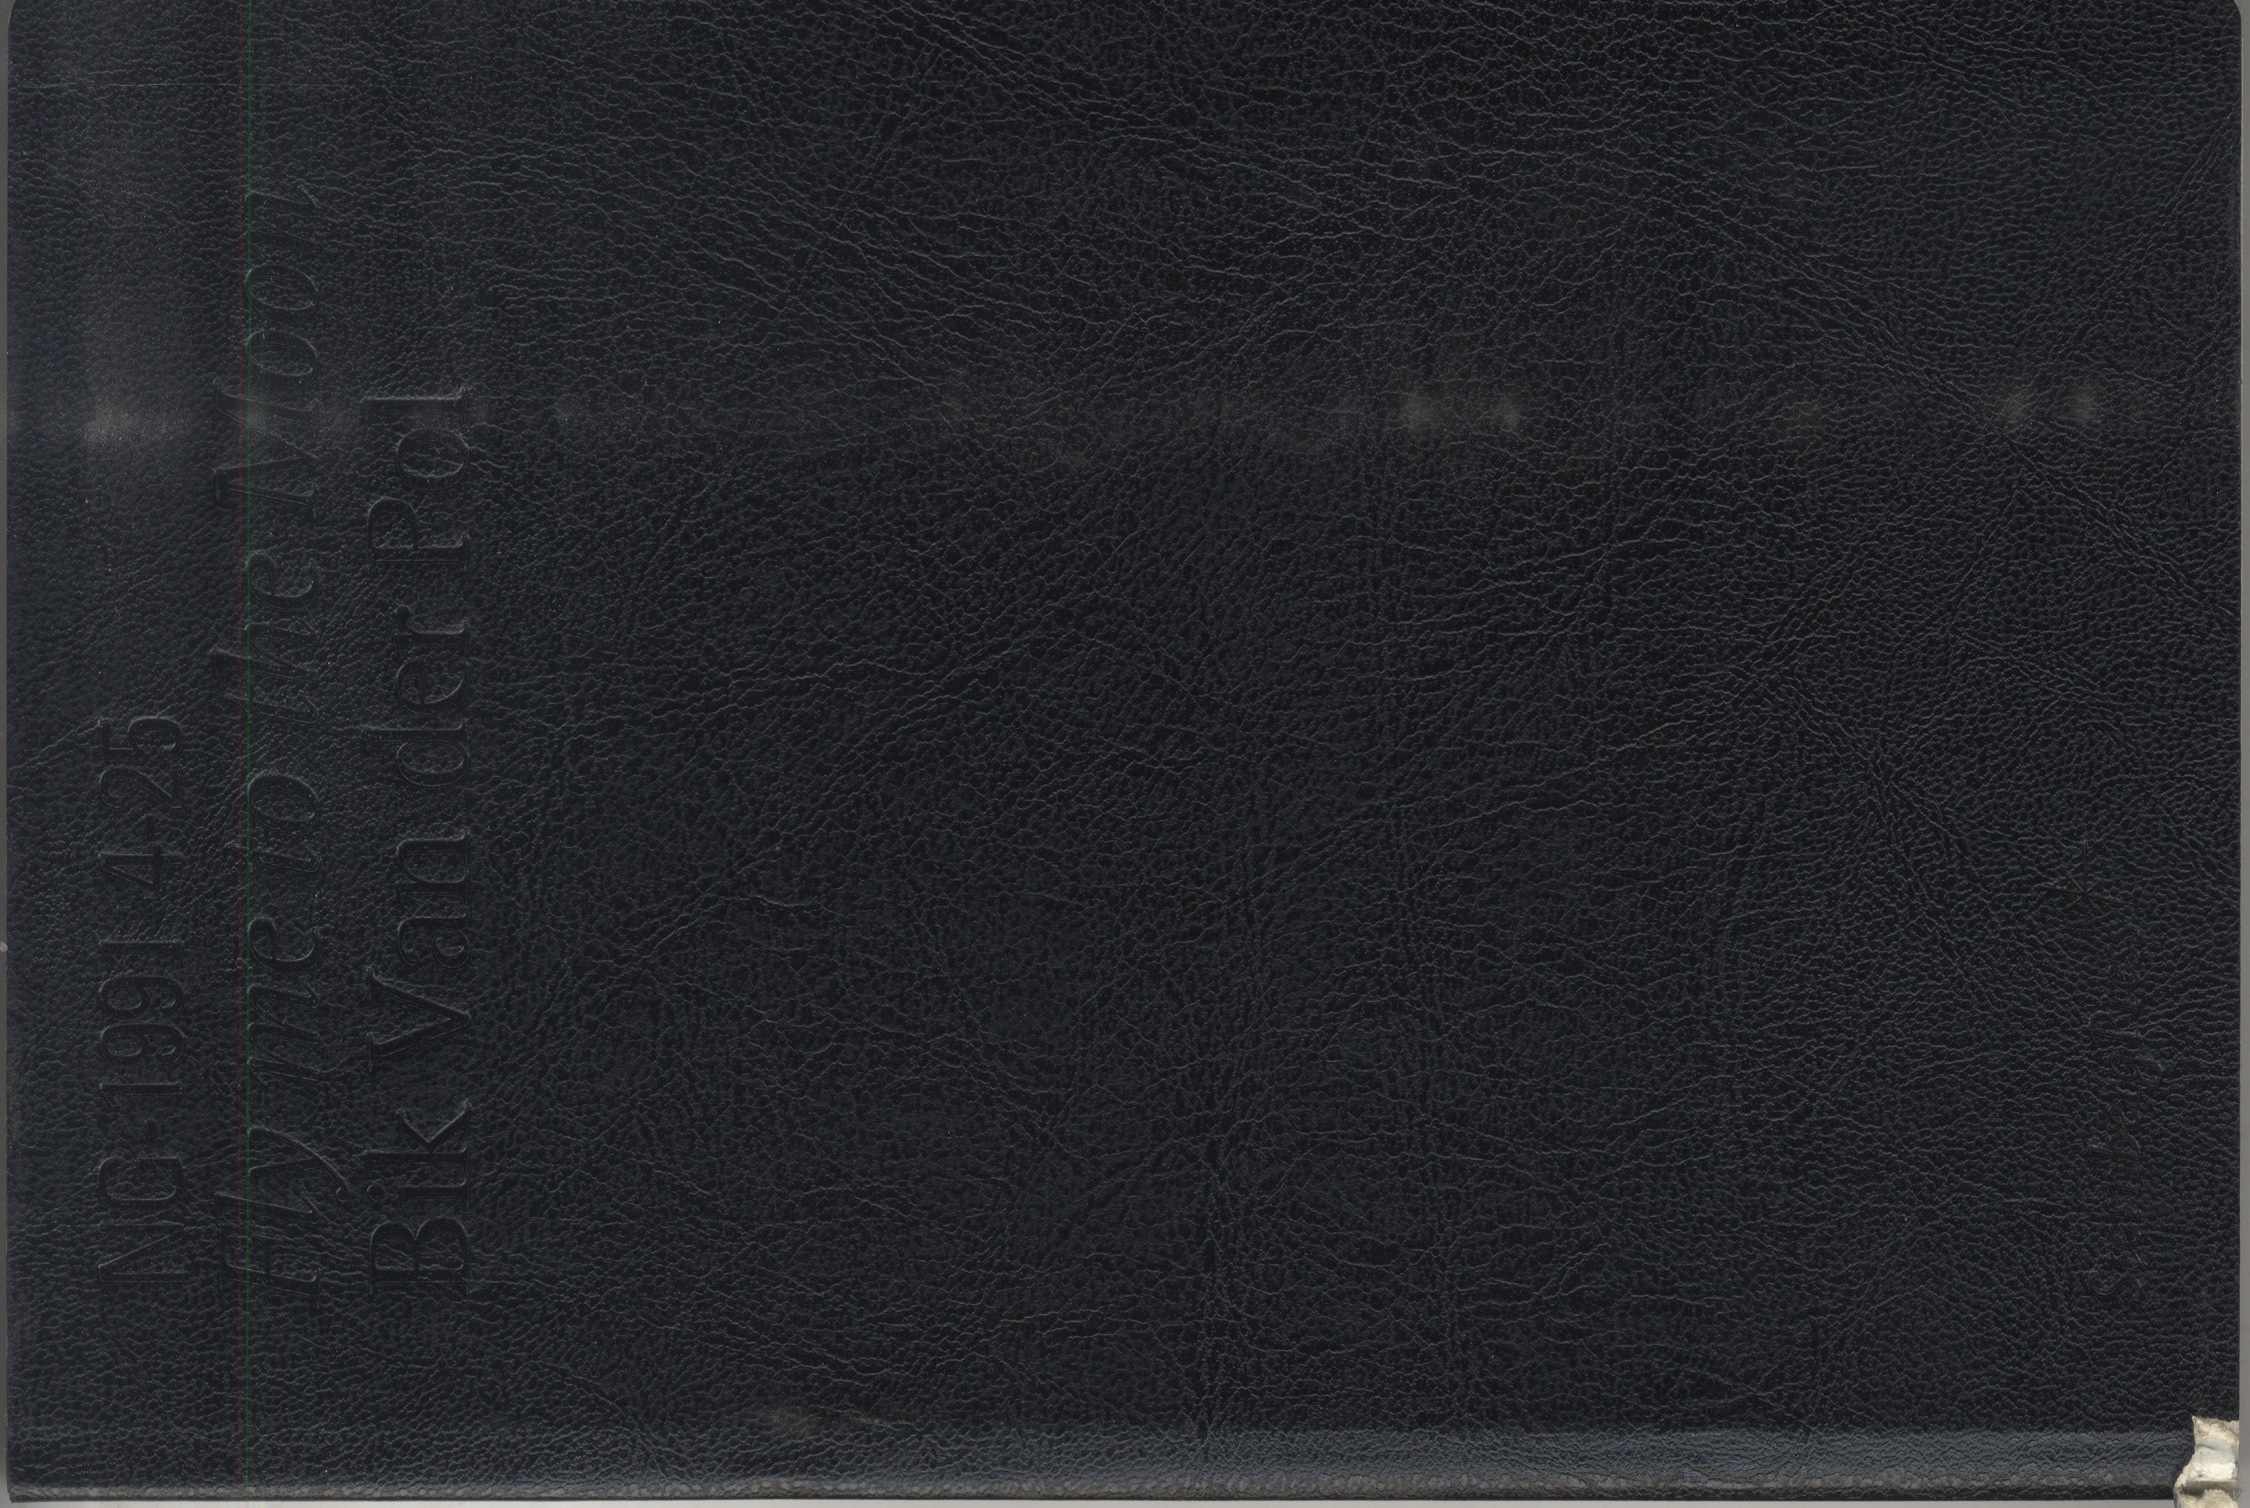 Blank black book cover with embossed title